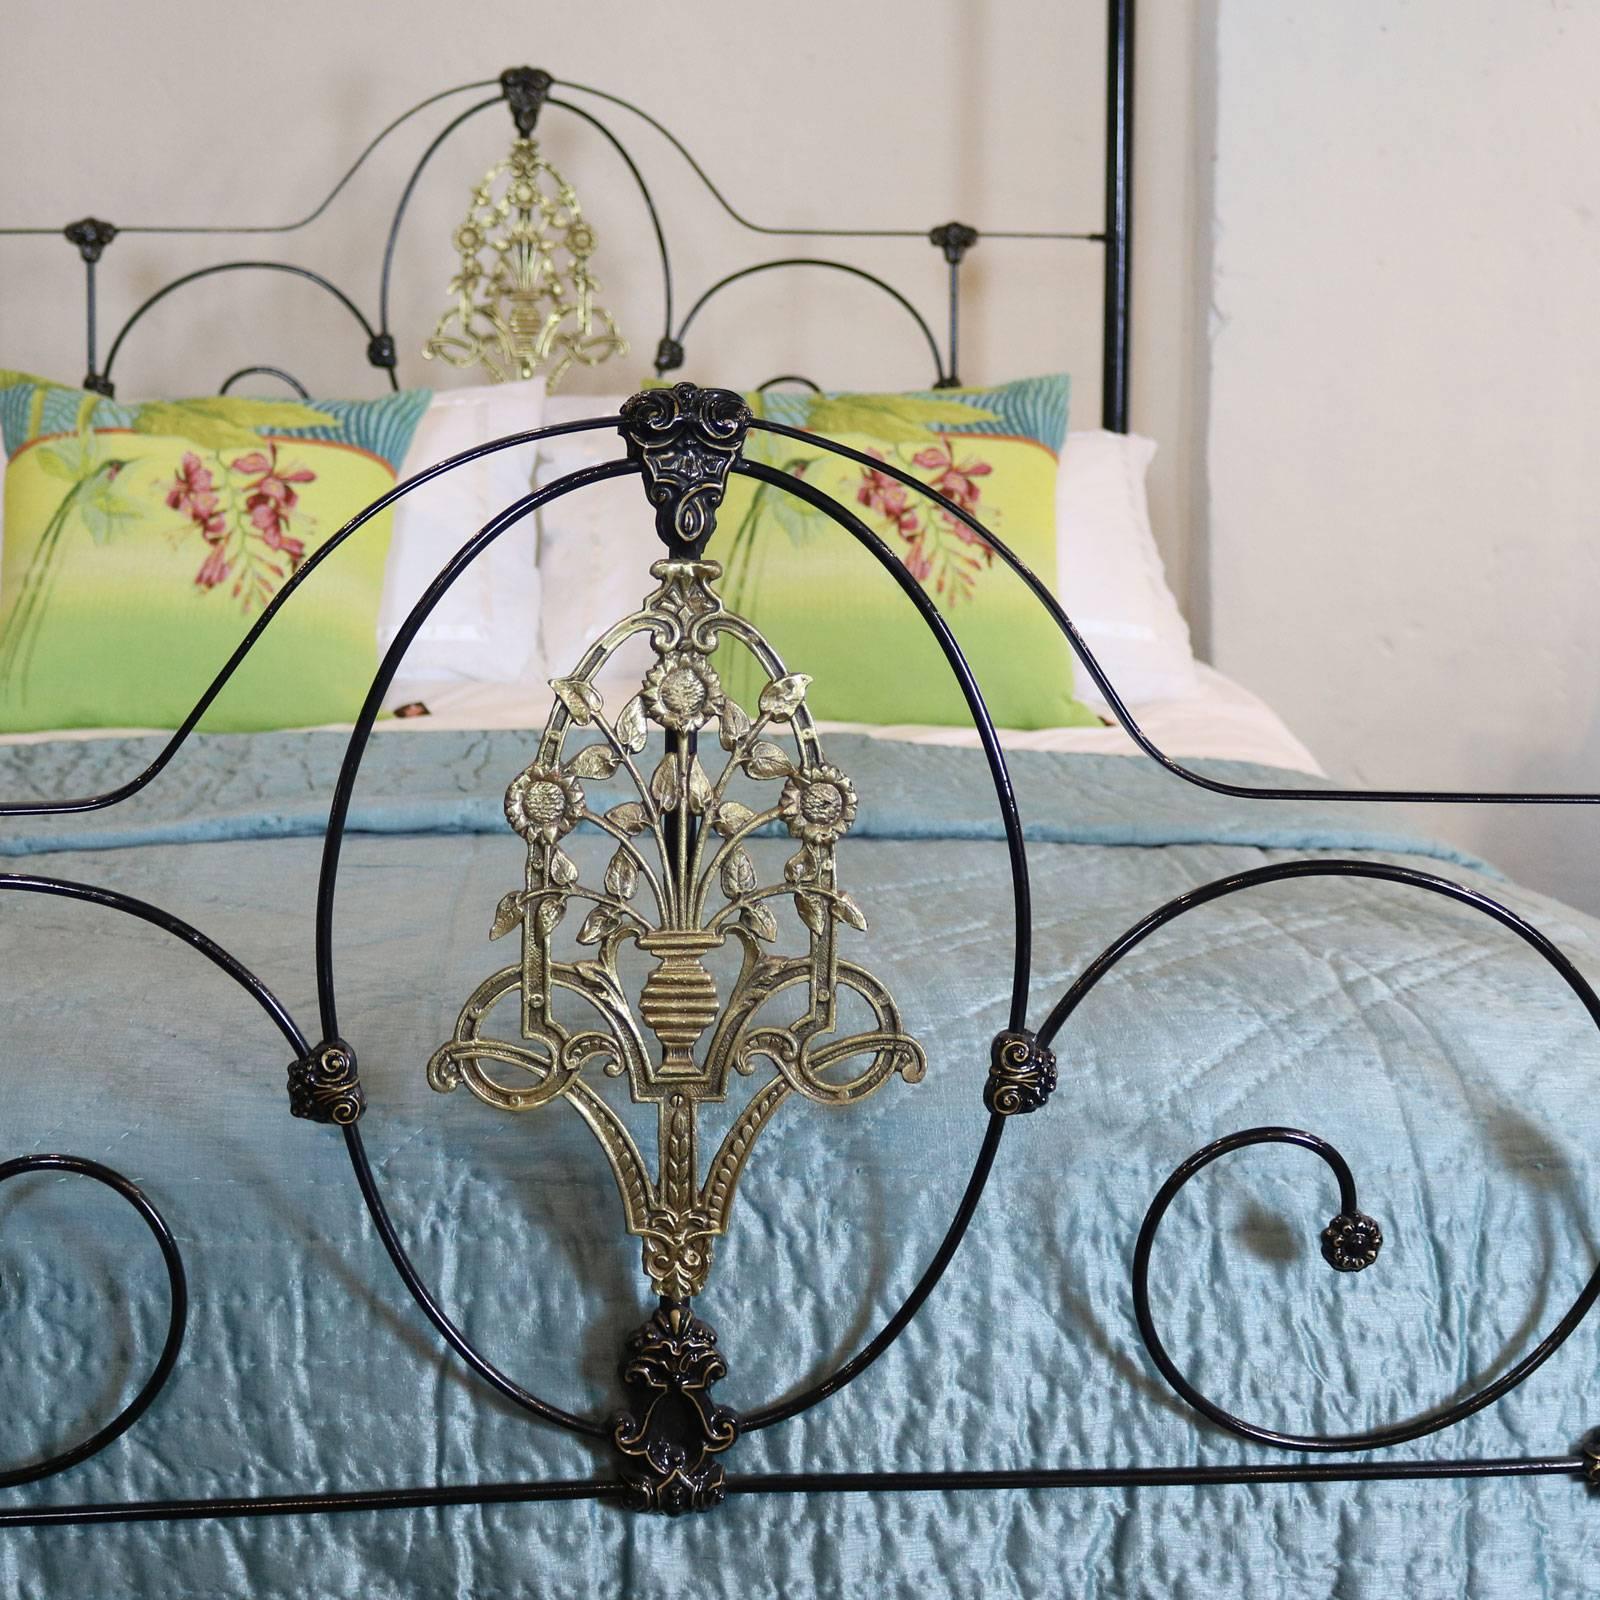 A cast iron four-poster bed bed from the mid-Victorian era restored in black with gold-lined cast iron mouldings, simple arched canopy and central brass casting depicting sunflowers.

The bed accepts a British king-size or American queen-size (60